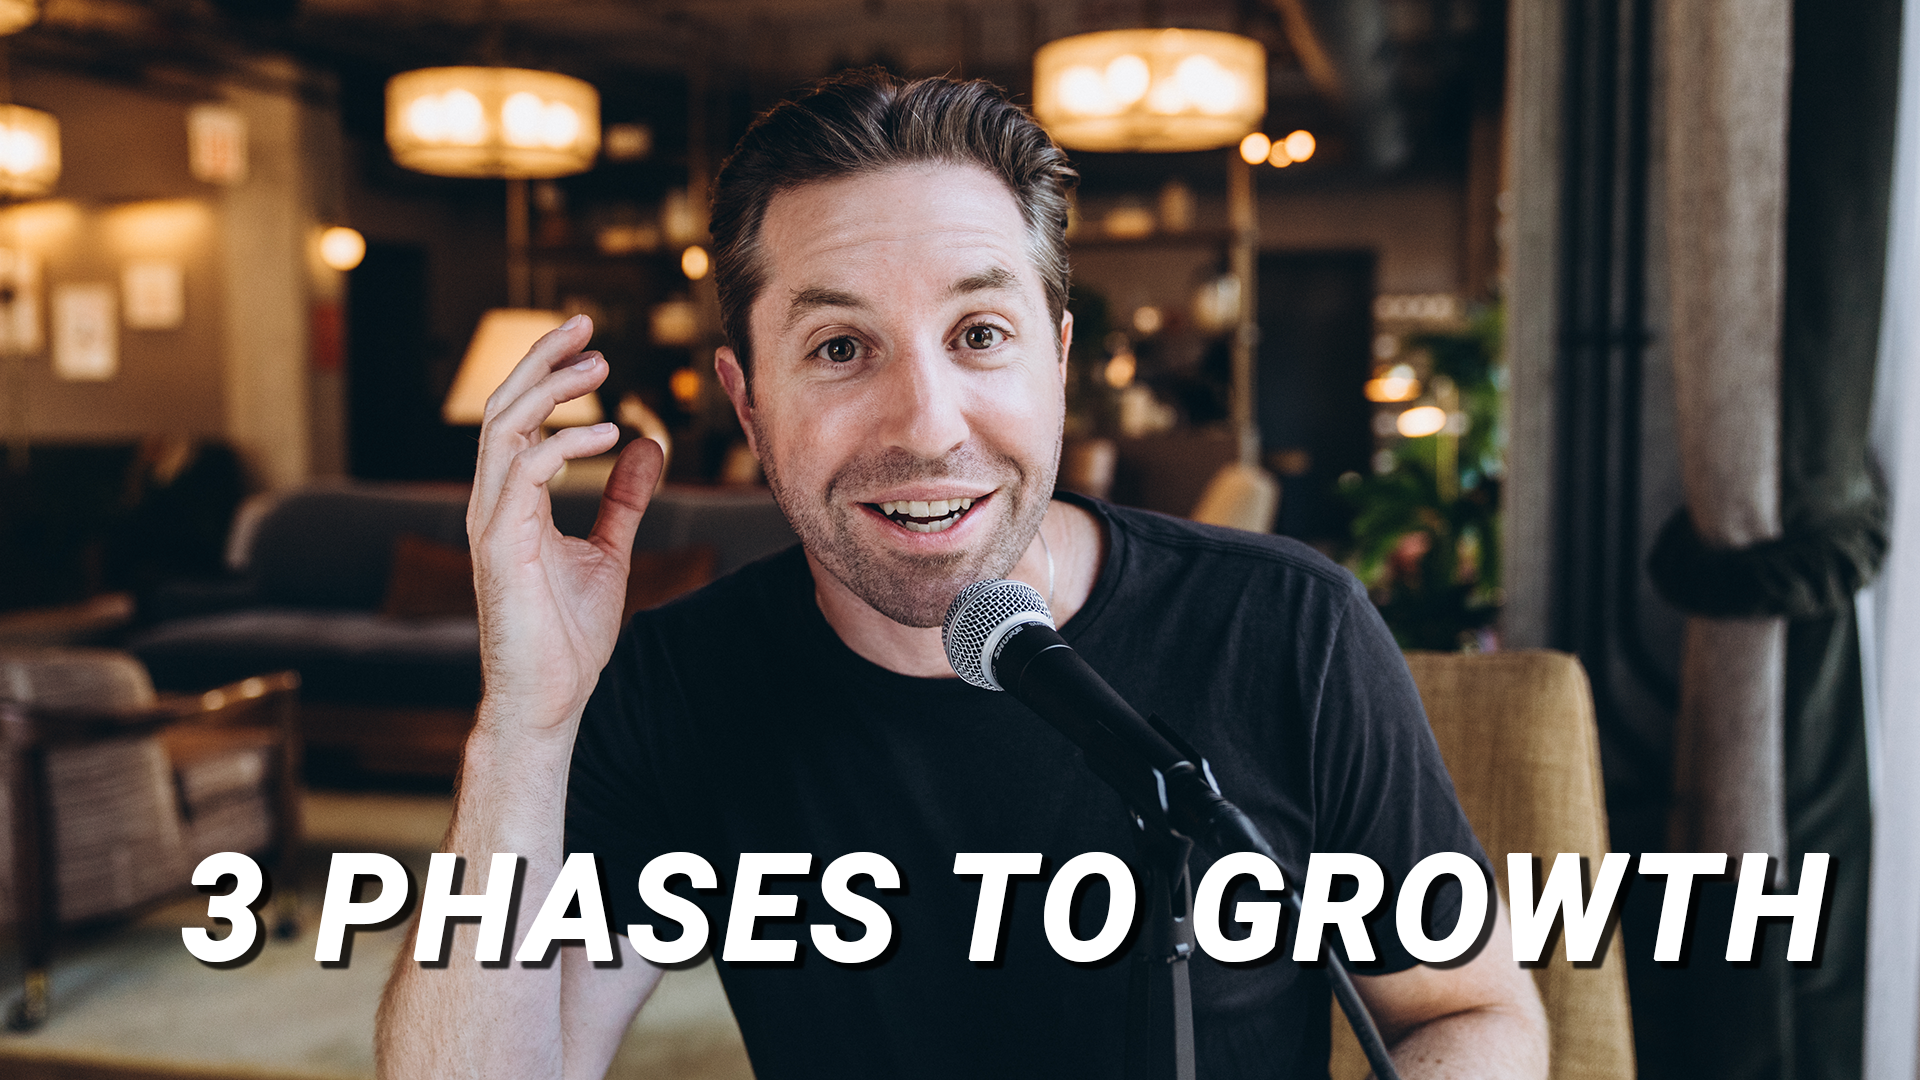 podcast launch strategy 3 phases to growth rob cressy